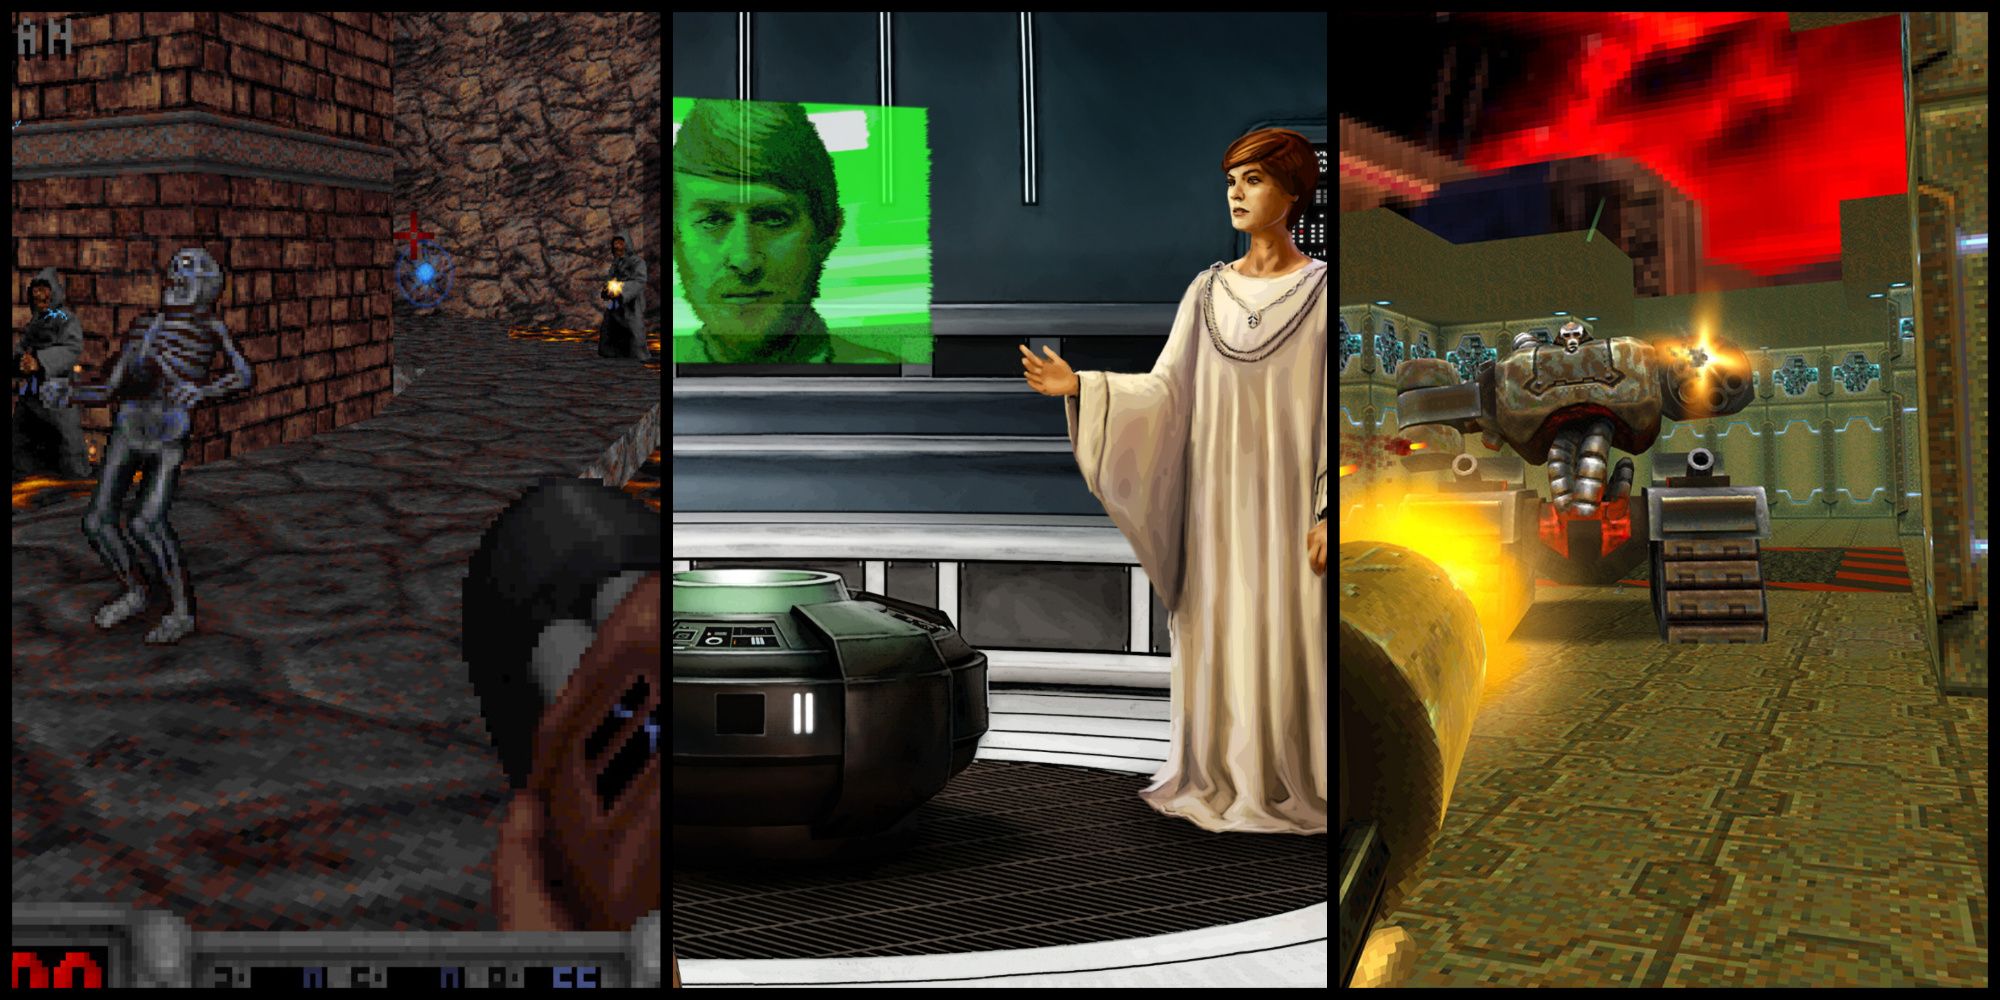 screenshots from Blood, STAR WARS: Dark Forces Remaster, and Quake 2